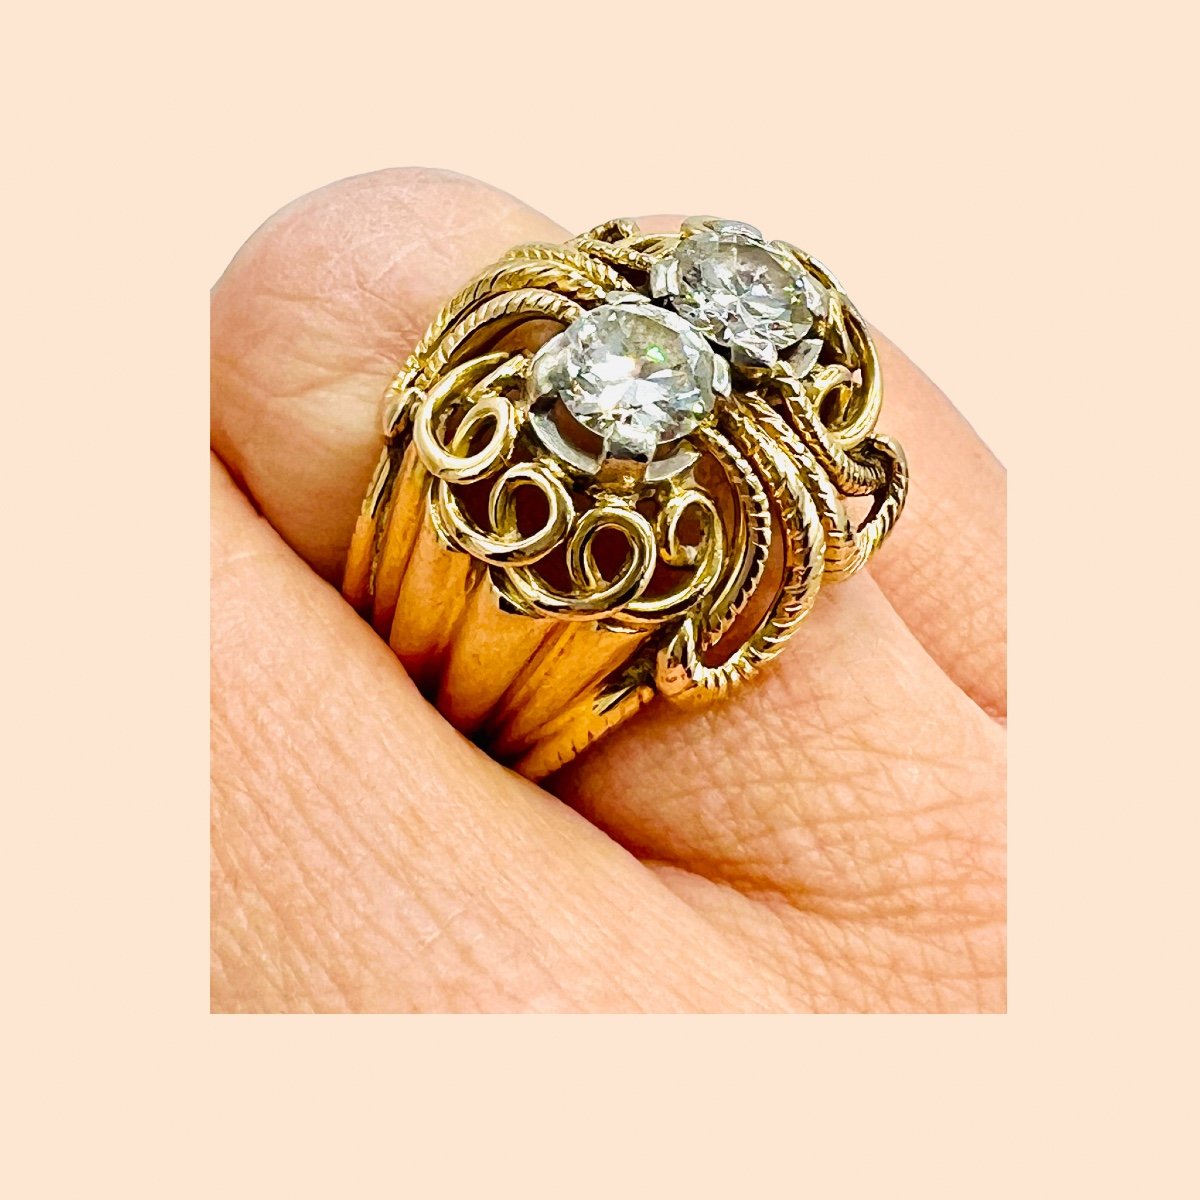 Superb Cocktail Ring From The 1950s In 18 Carat Gold, Set With Two Modern Cut Diamonds,-photo-1